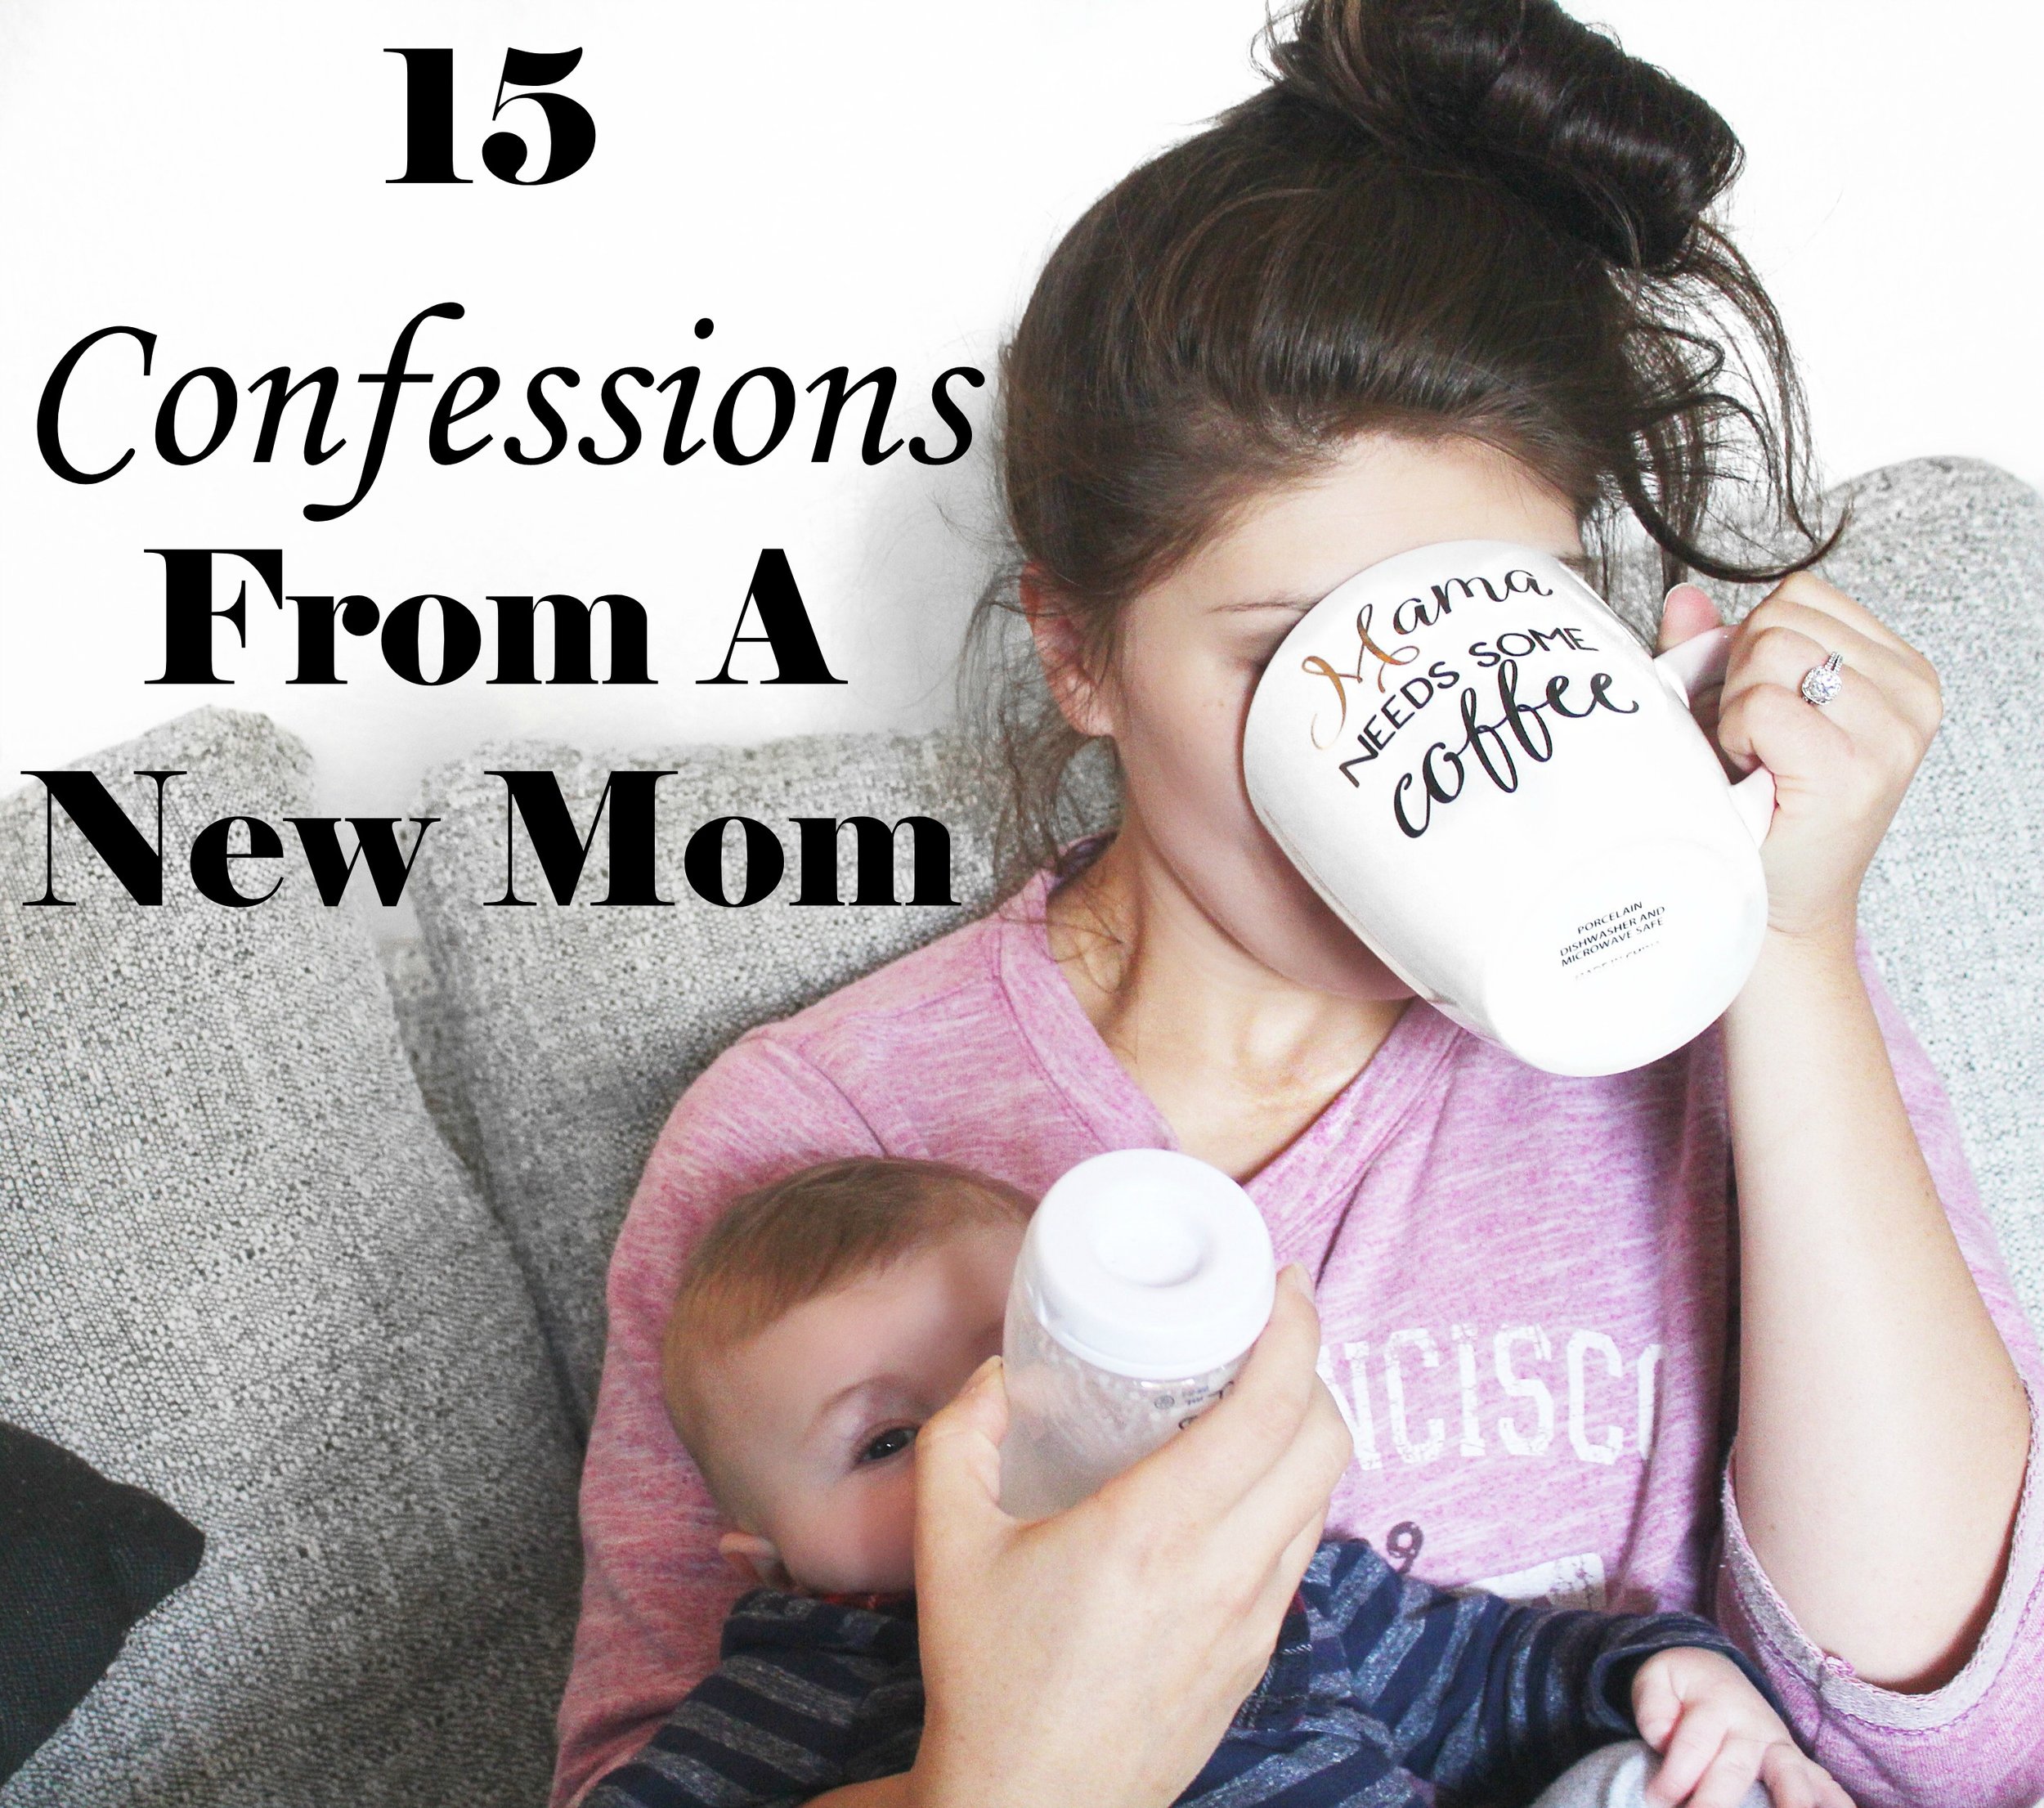 15 confessions from a new mom